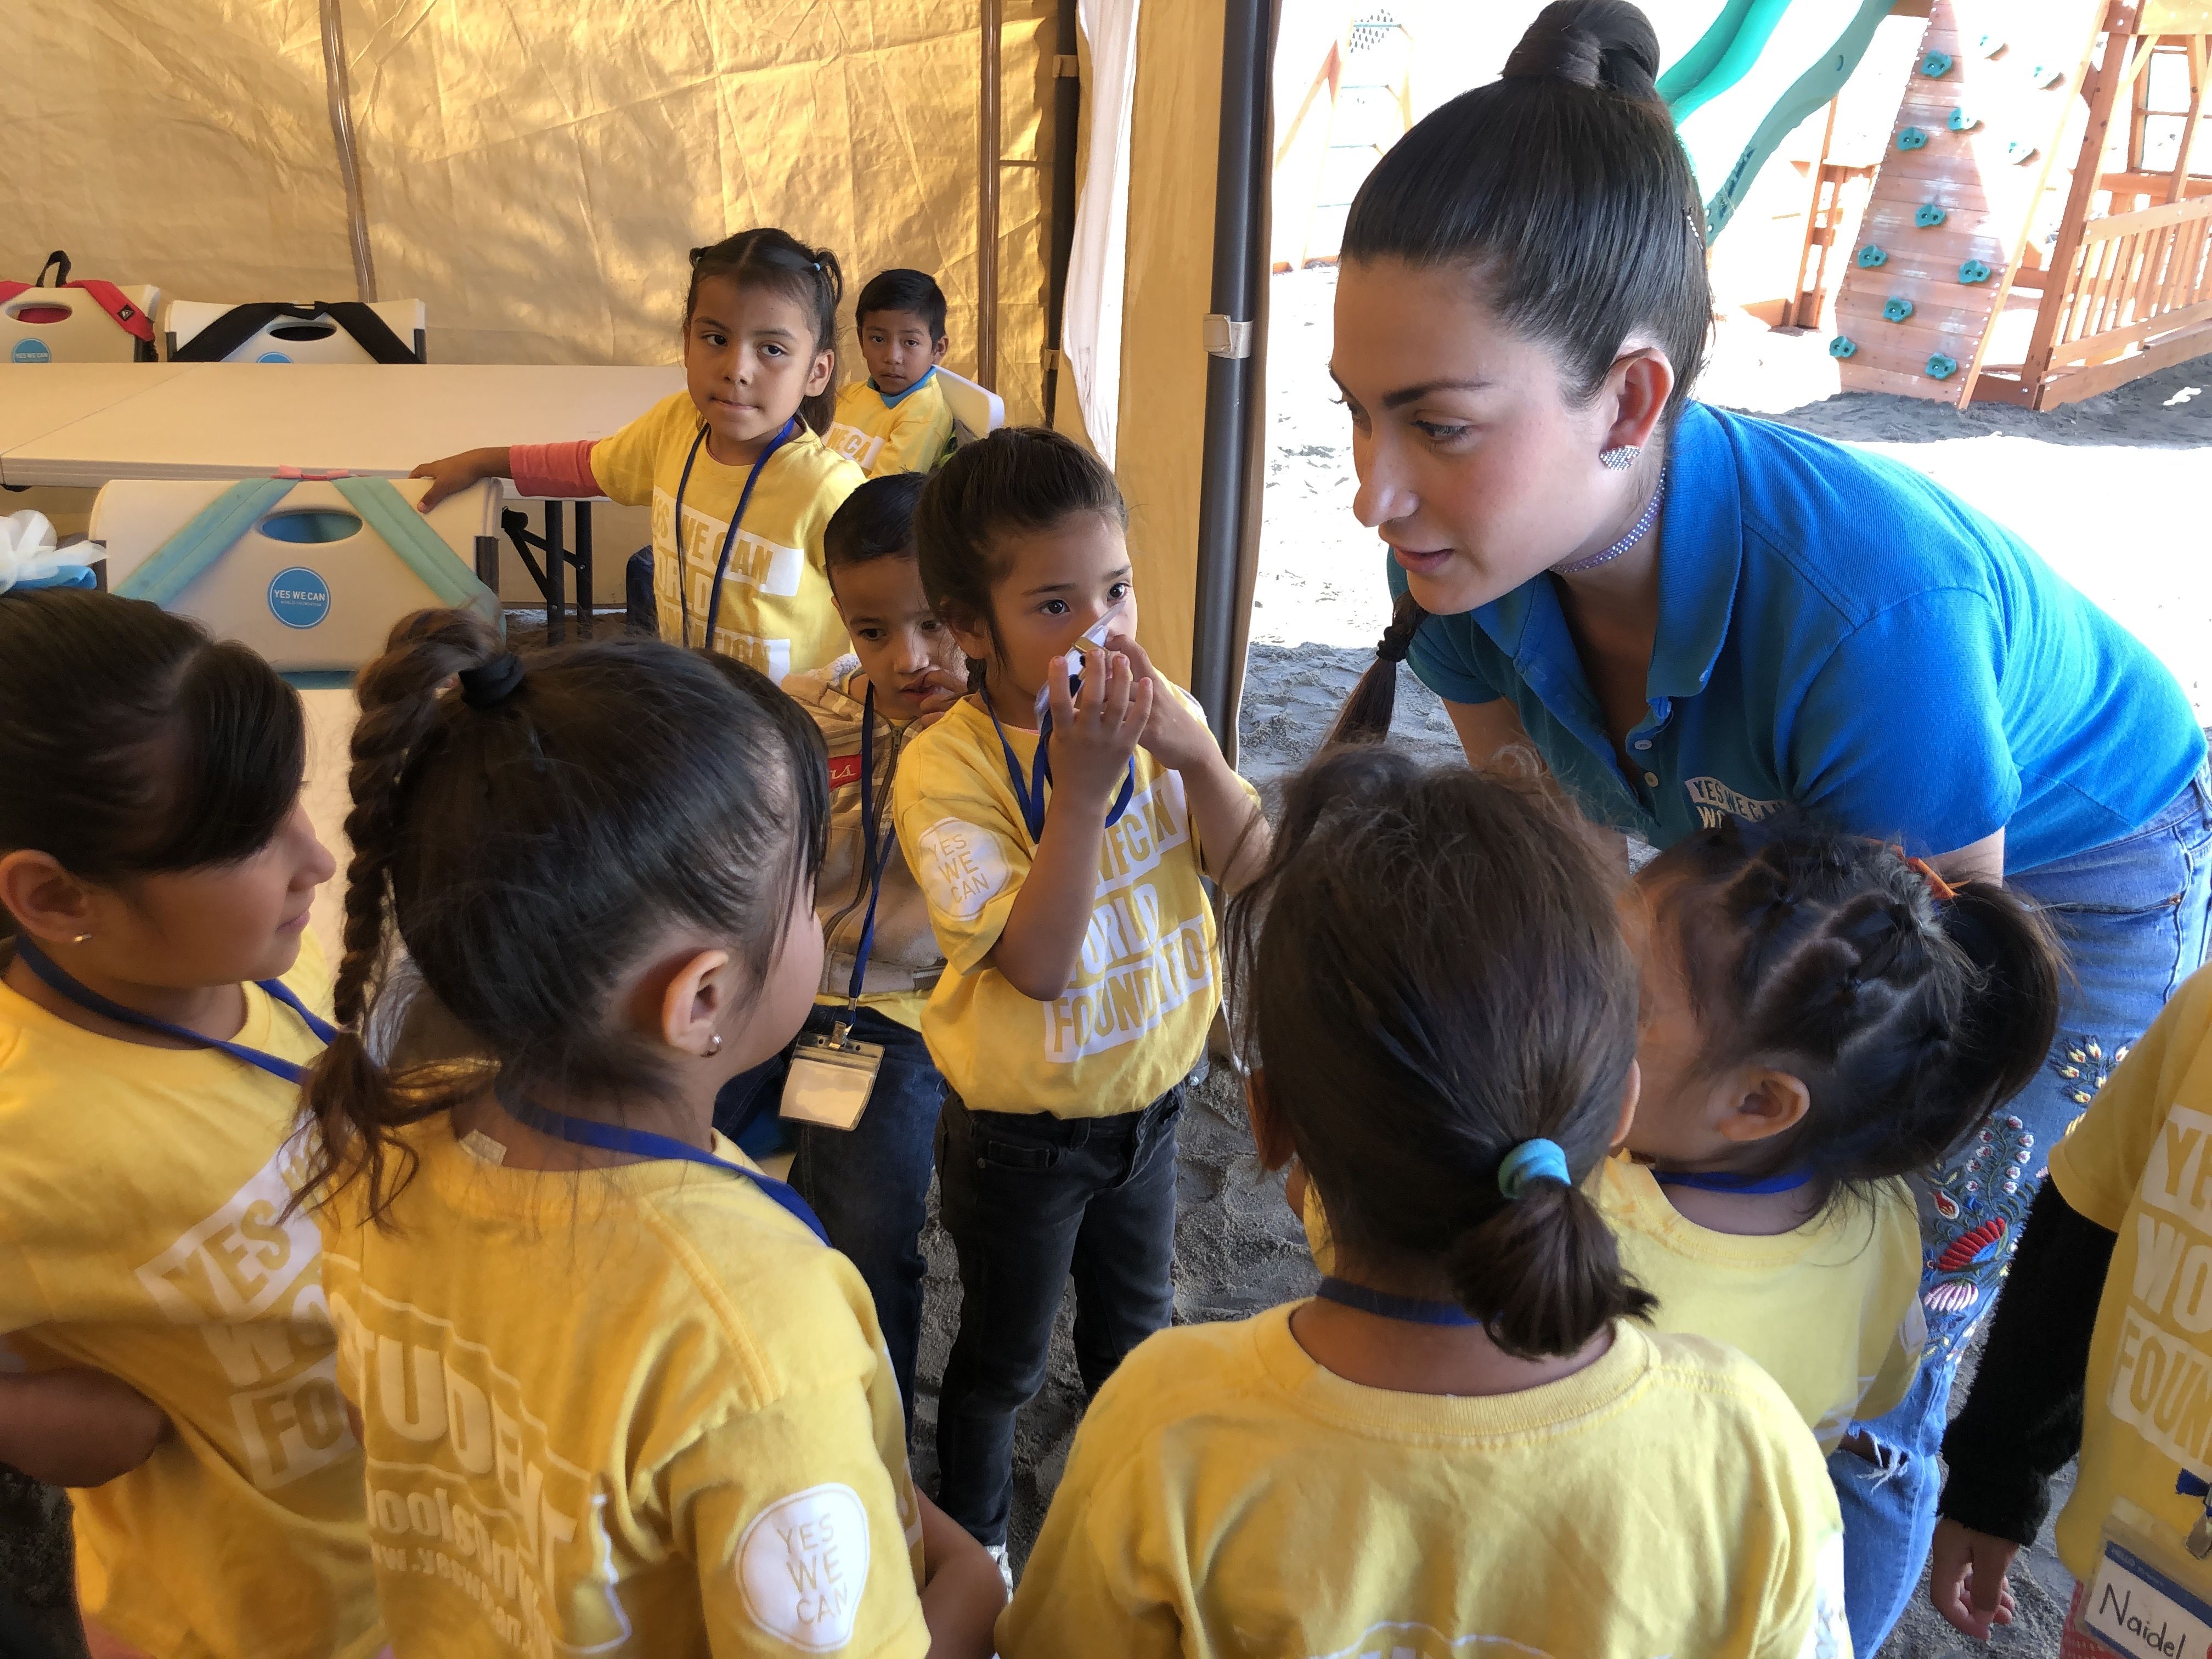 Estefanía Rebellón greets students at the Yes We Can World Foundation school in Tijuana, Mexico, on October 3. Image by Jaime Joyce. United States, 2019.